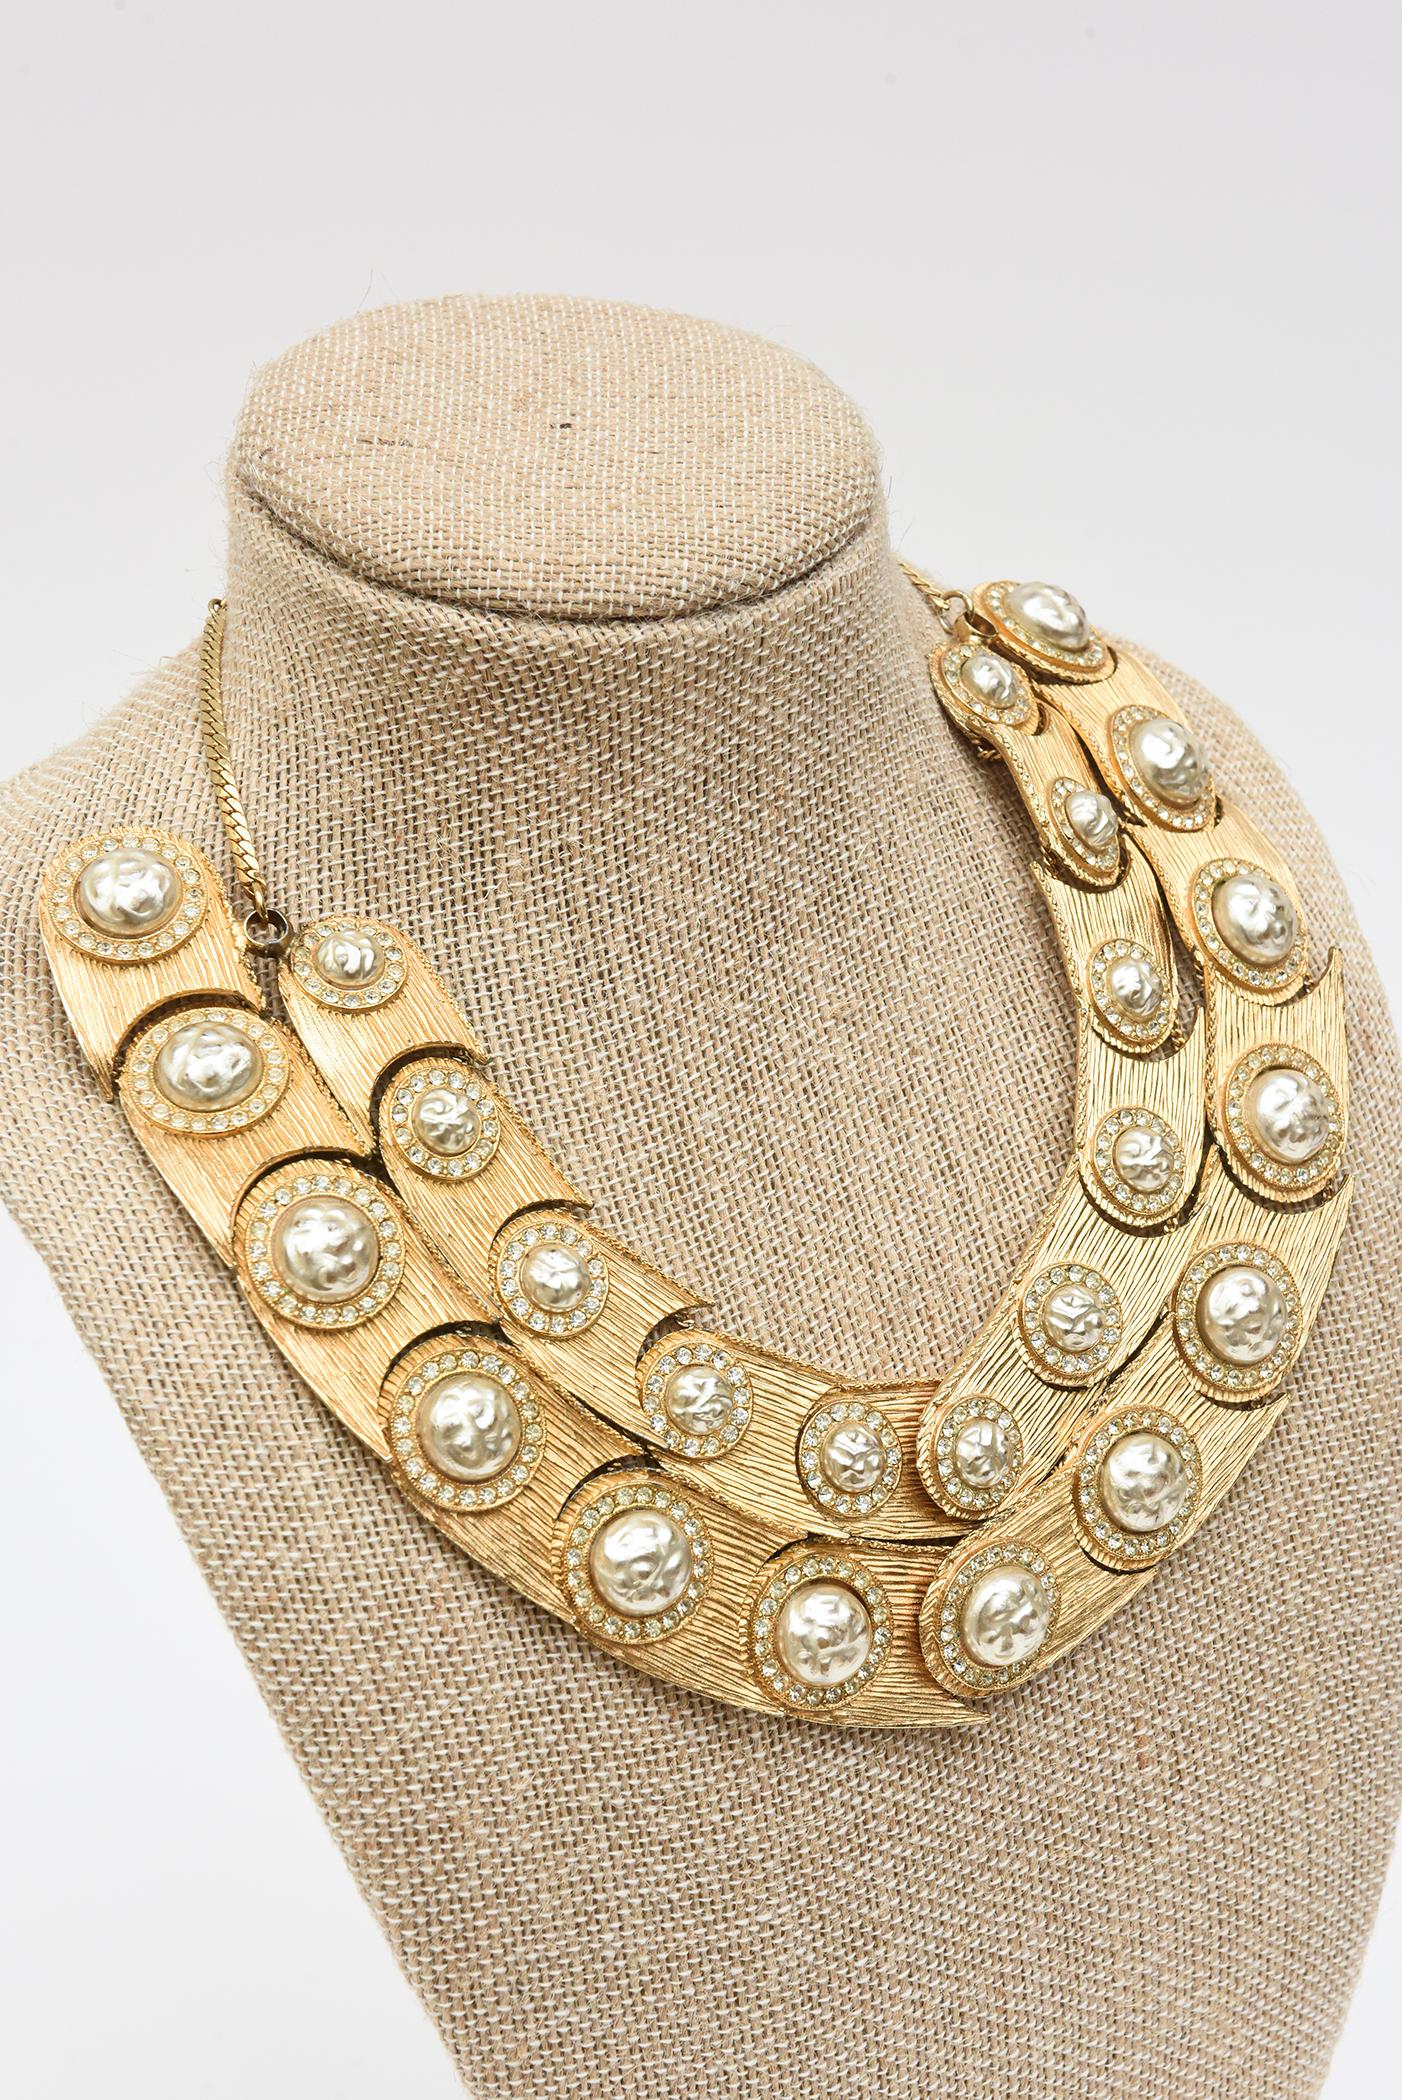 Mosell Vintage Faux Baroque Pearl, Rhinestone, Gilt Metal Bib Necklace For Sale 1